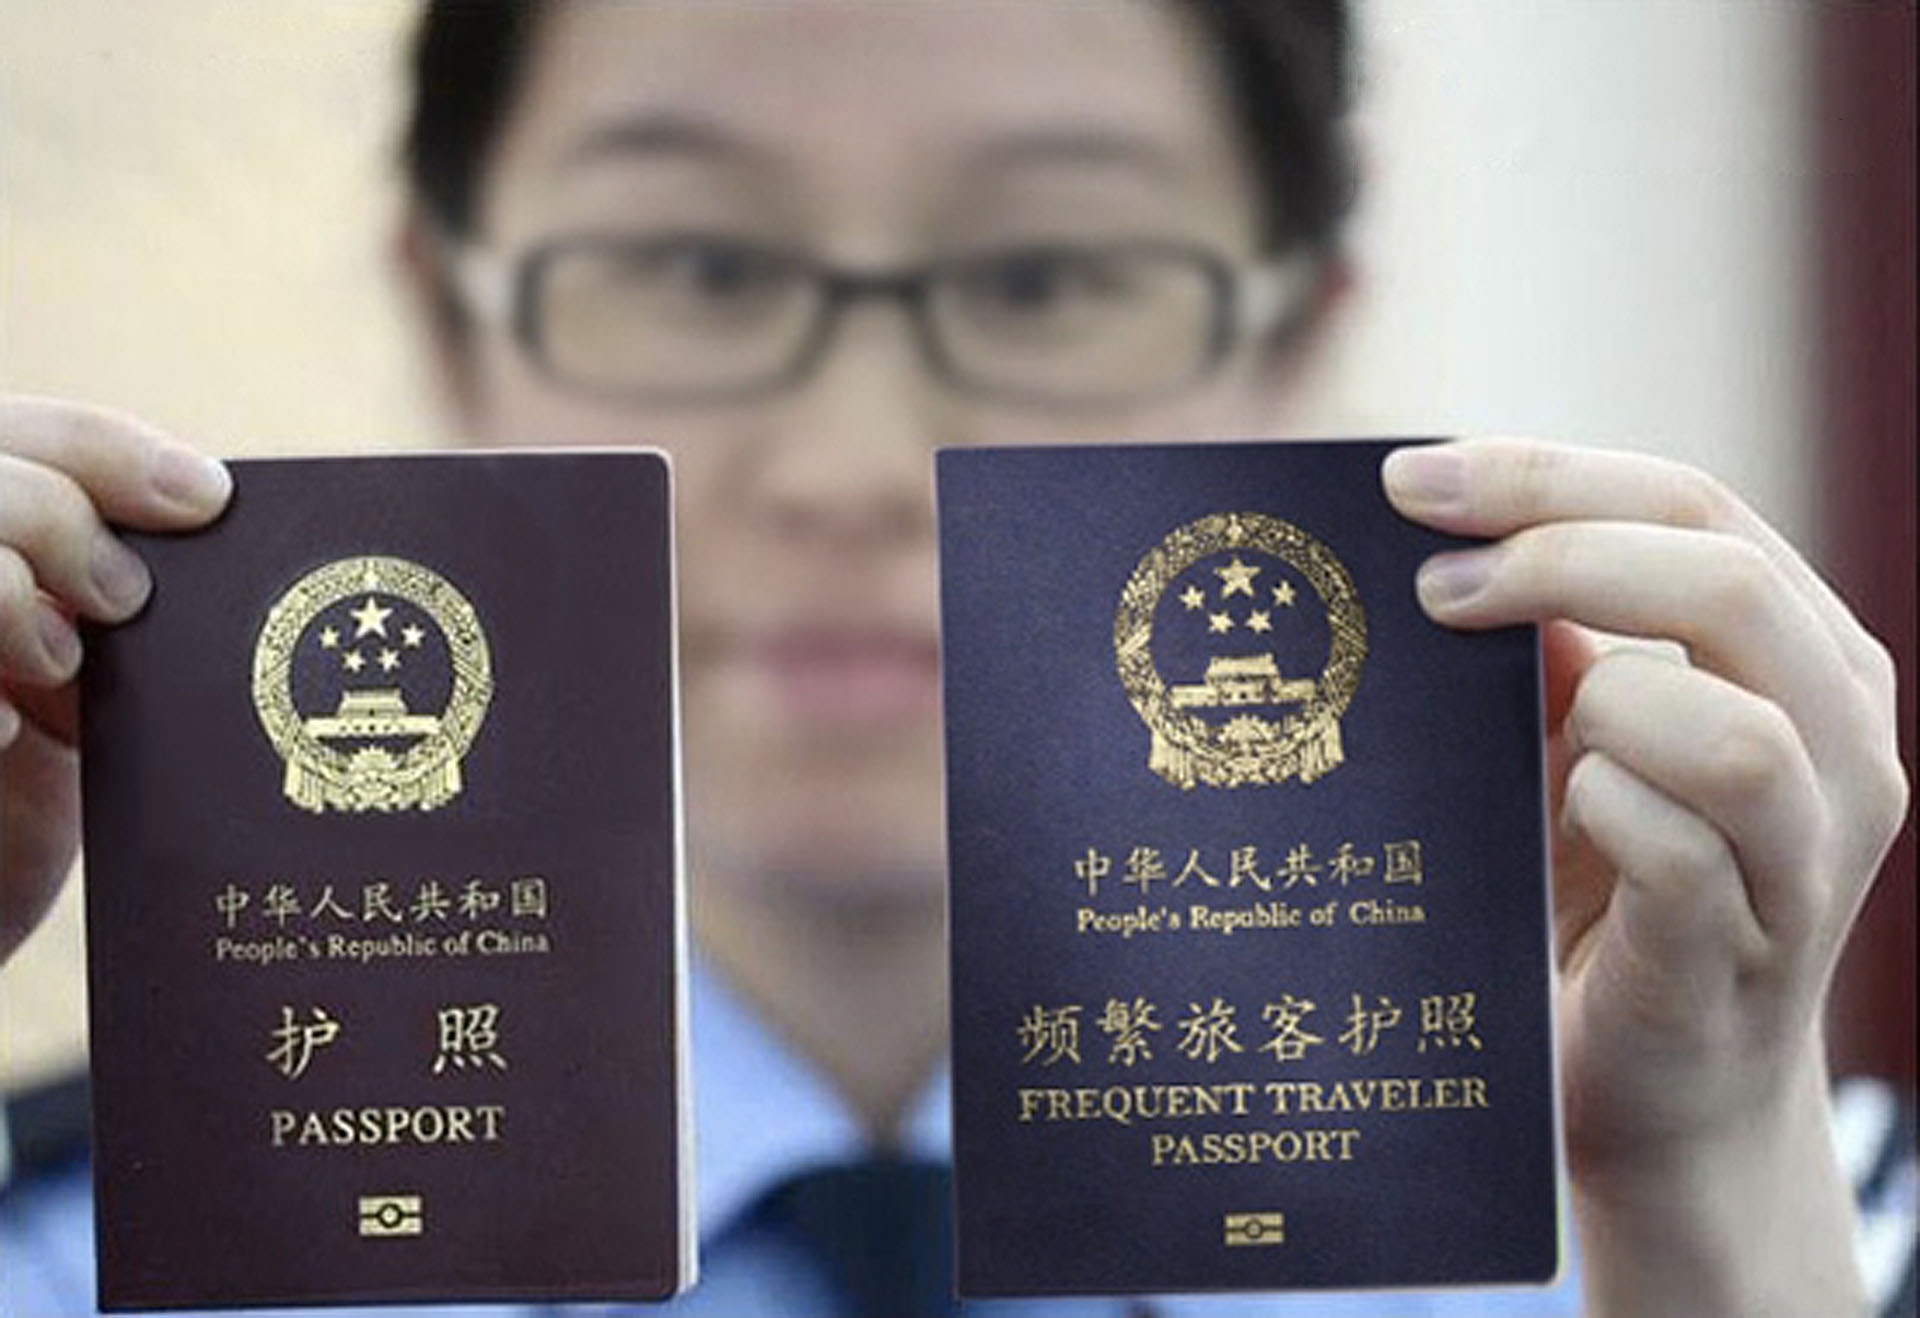 The edited image that accompanied the story shows a new "frequent traveler passport" next to the ordinary Chinese passport.